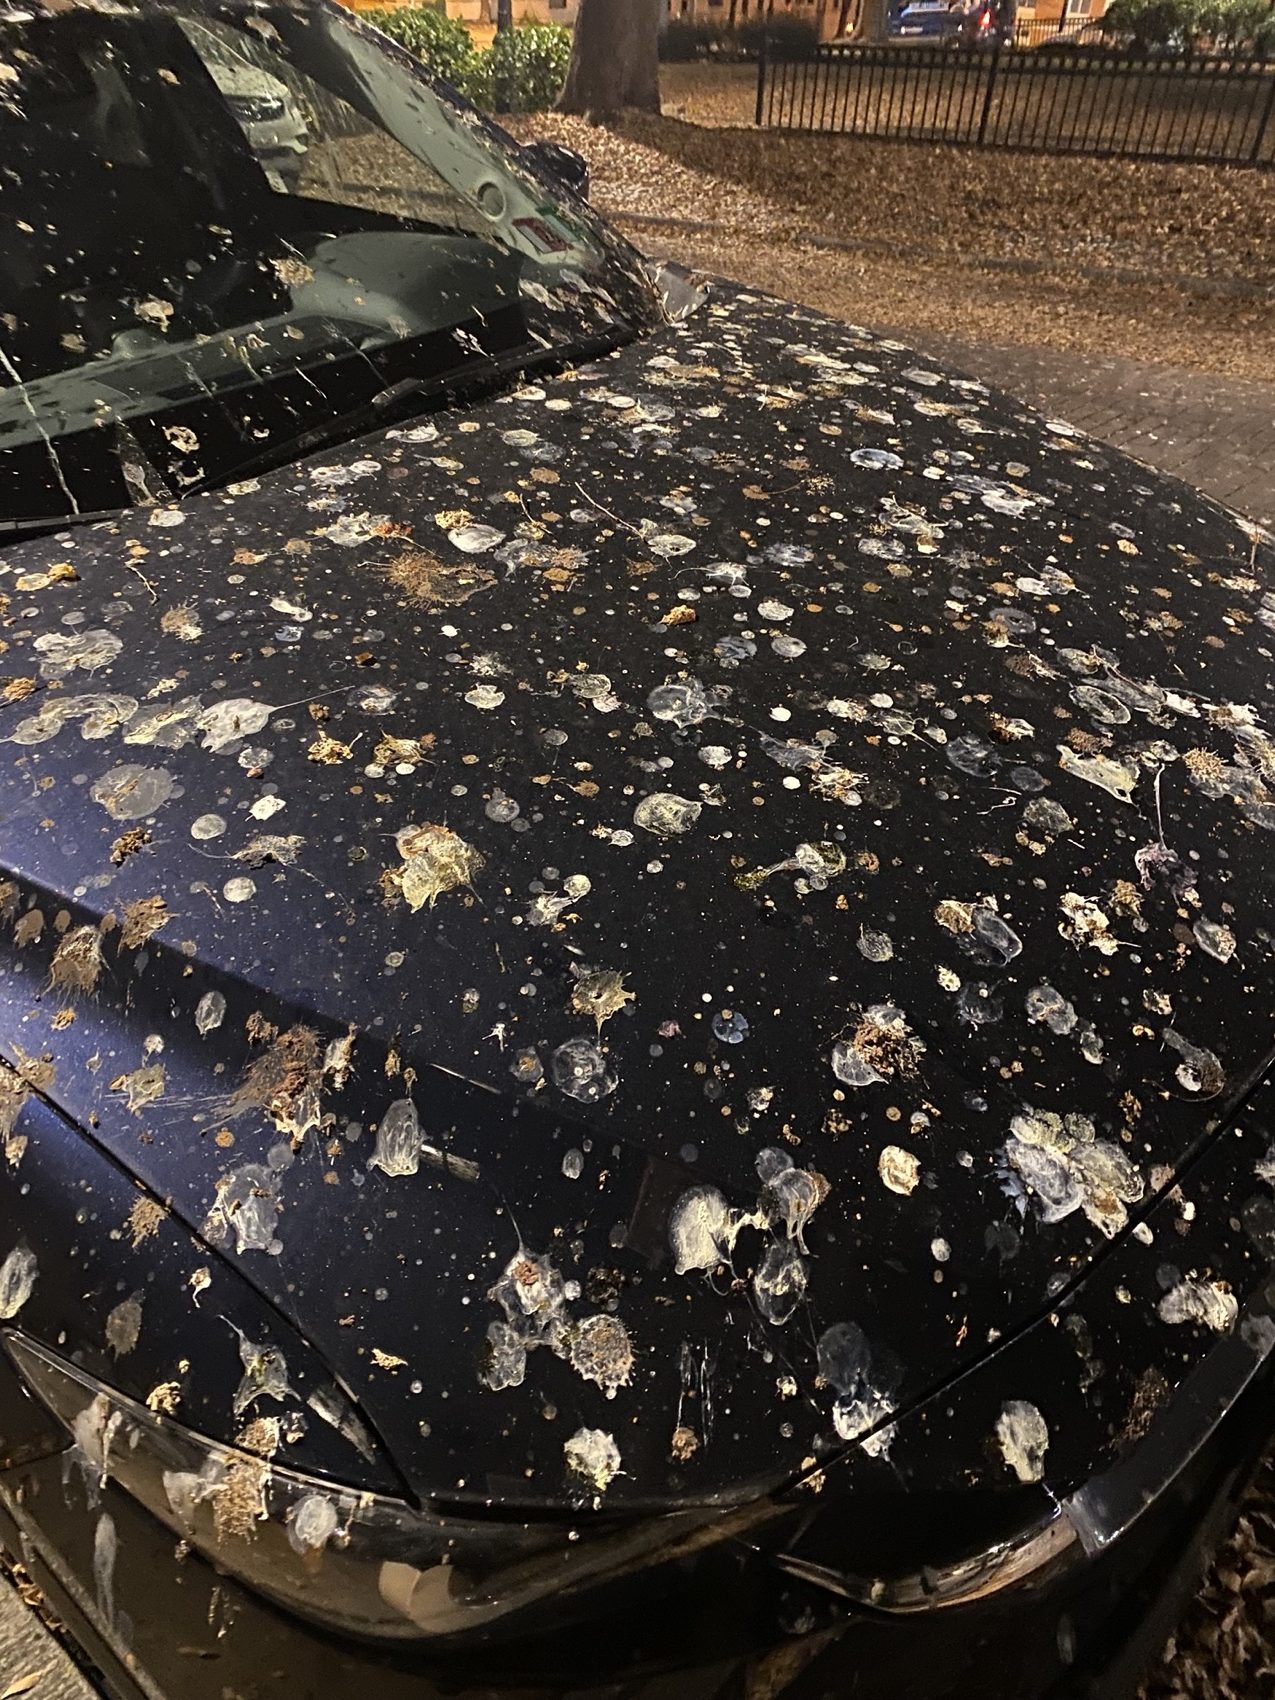 the hood of a black car parked on a street at night. the entire hood is coated in bird poop